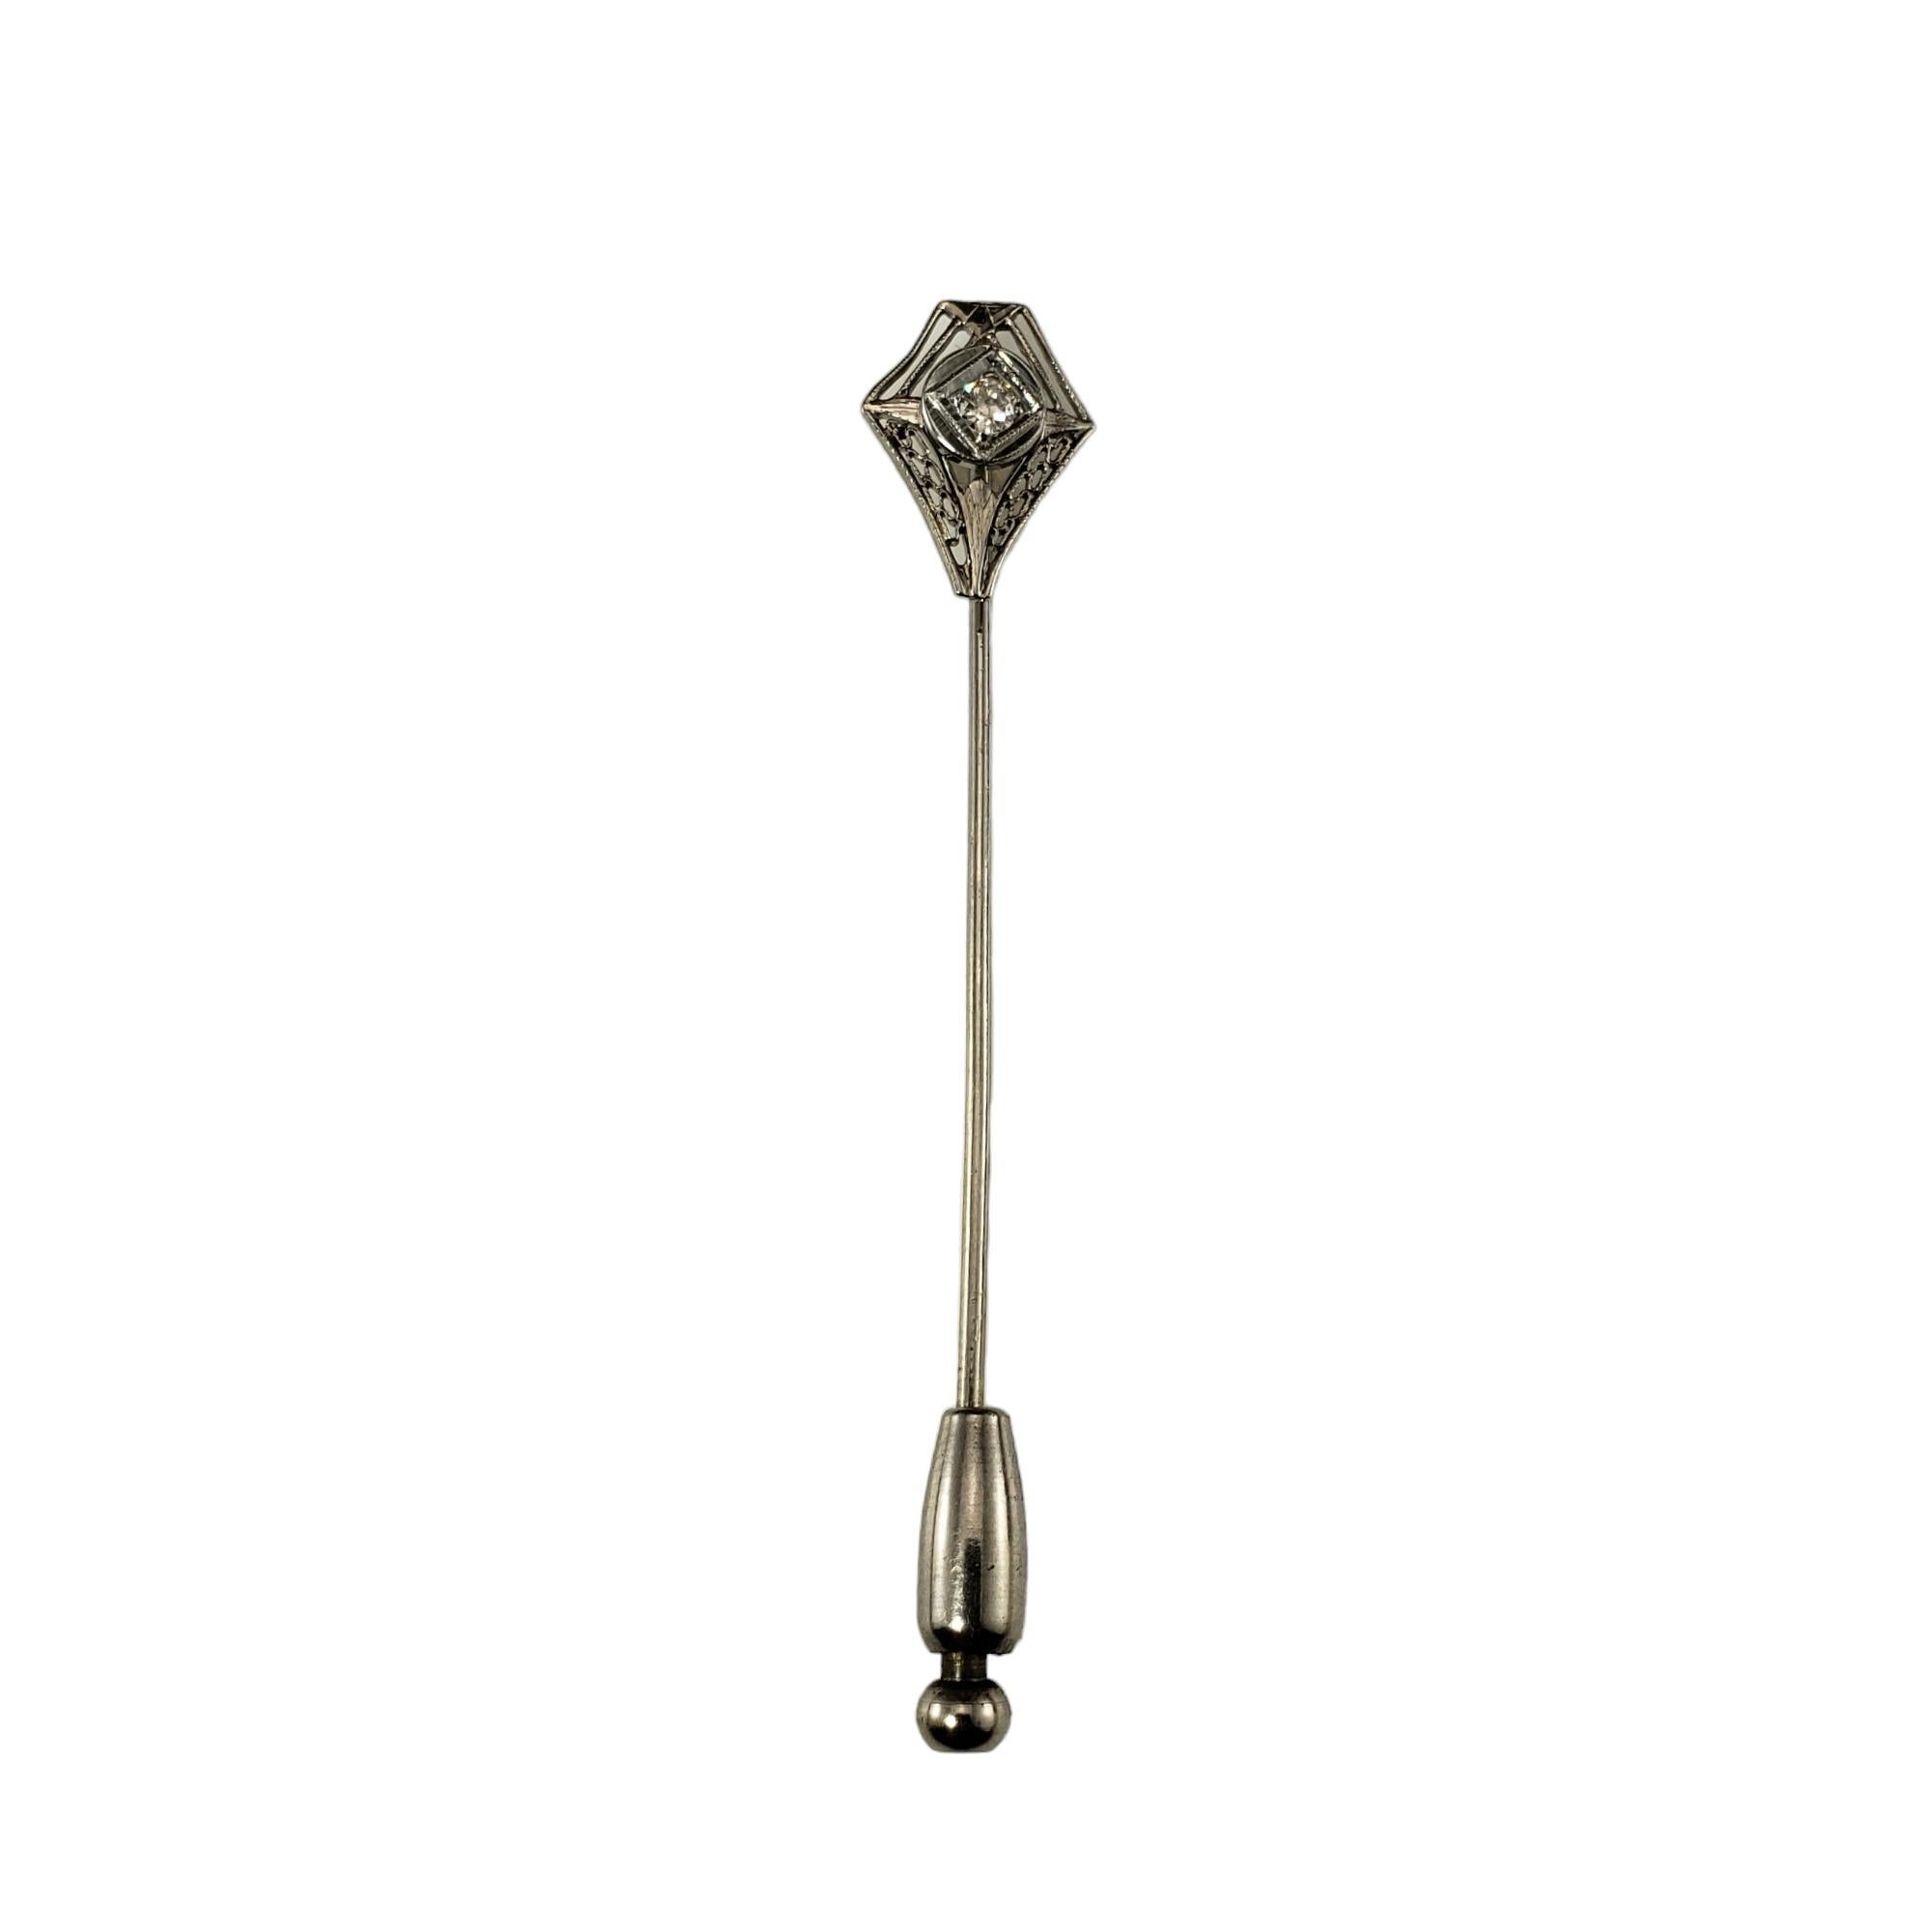 Vintage 10K White Gold and Diamond Stick Pin-

This elegant pin features one round old mine cut diamond set in classic 10K white gold.

Approximate total diamond weight: .06 ct.

Diamond color: H

Diamond clarity: SI1

Size: 2.4 inches x 10